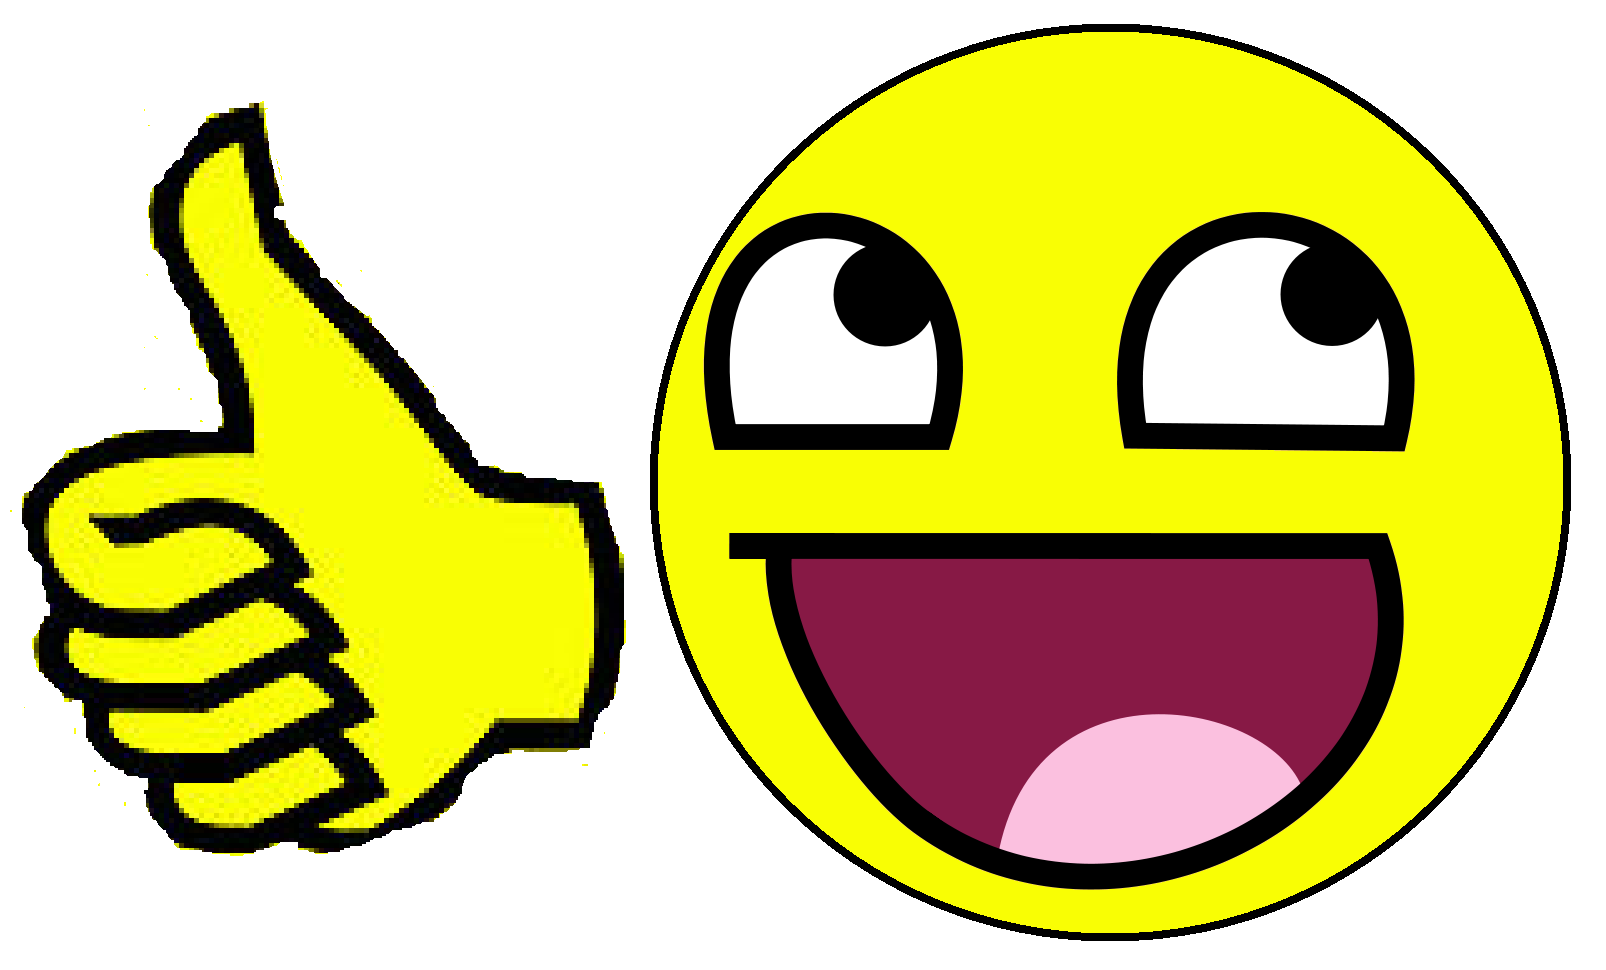 15 Thumbs Up Smiley Faces Free Cliparts That You Can Download To You    